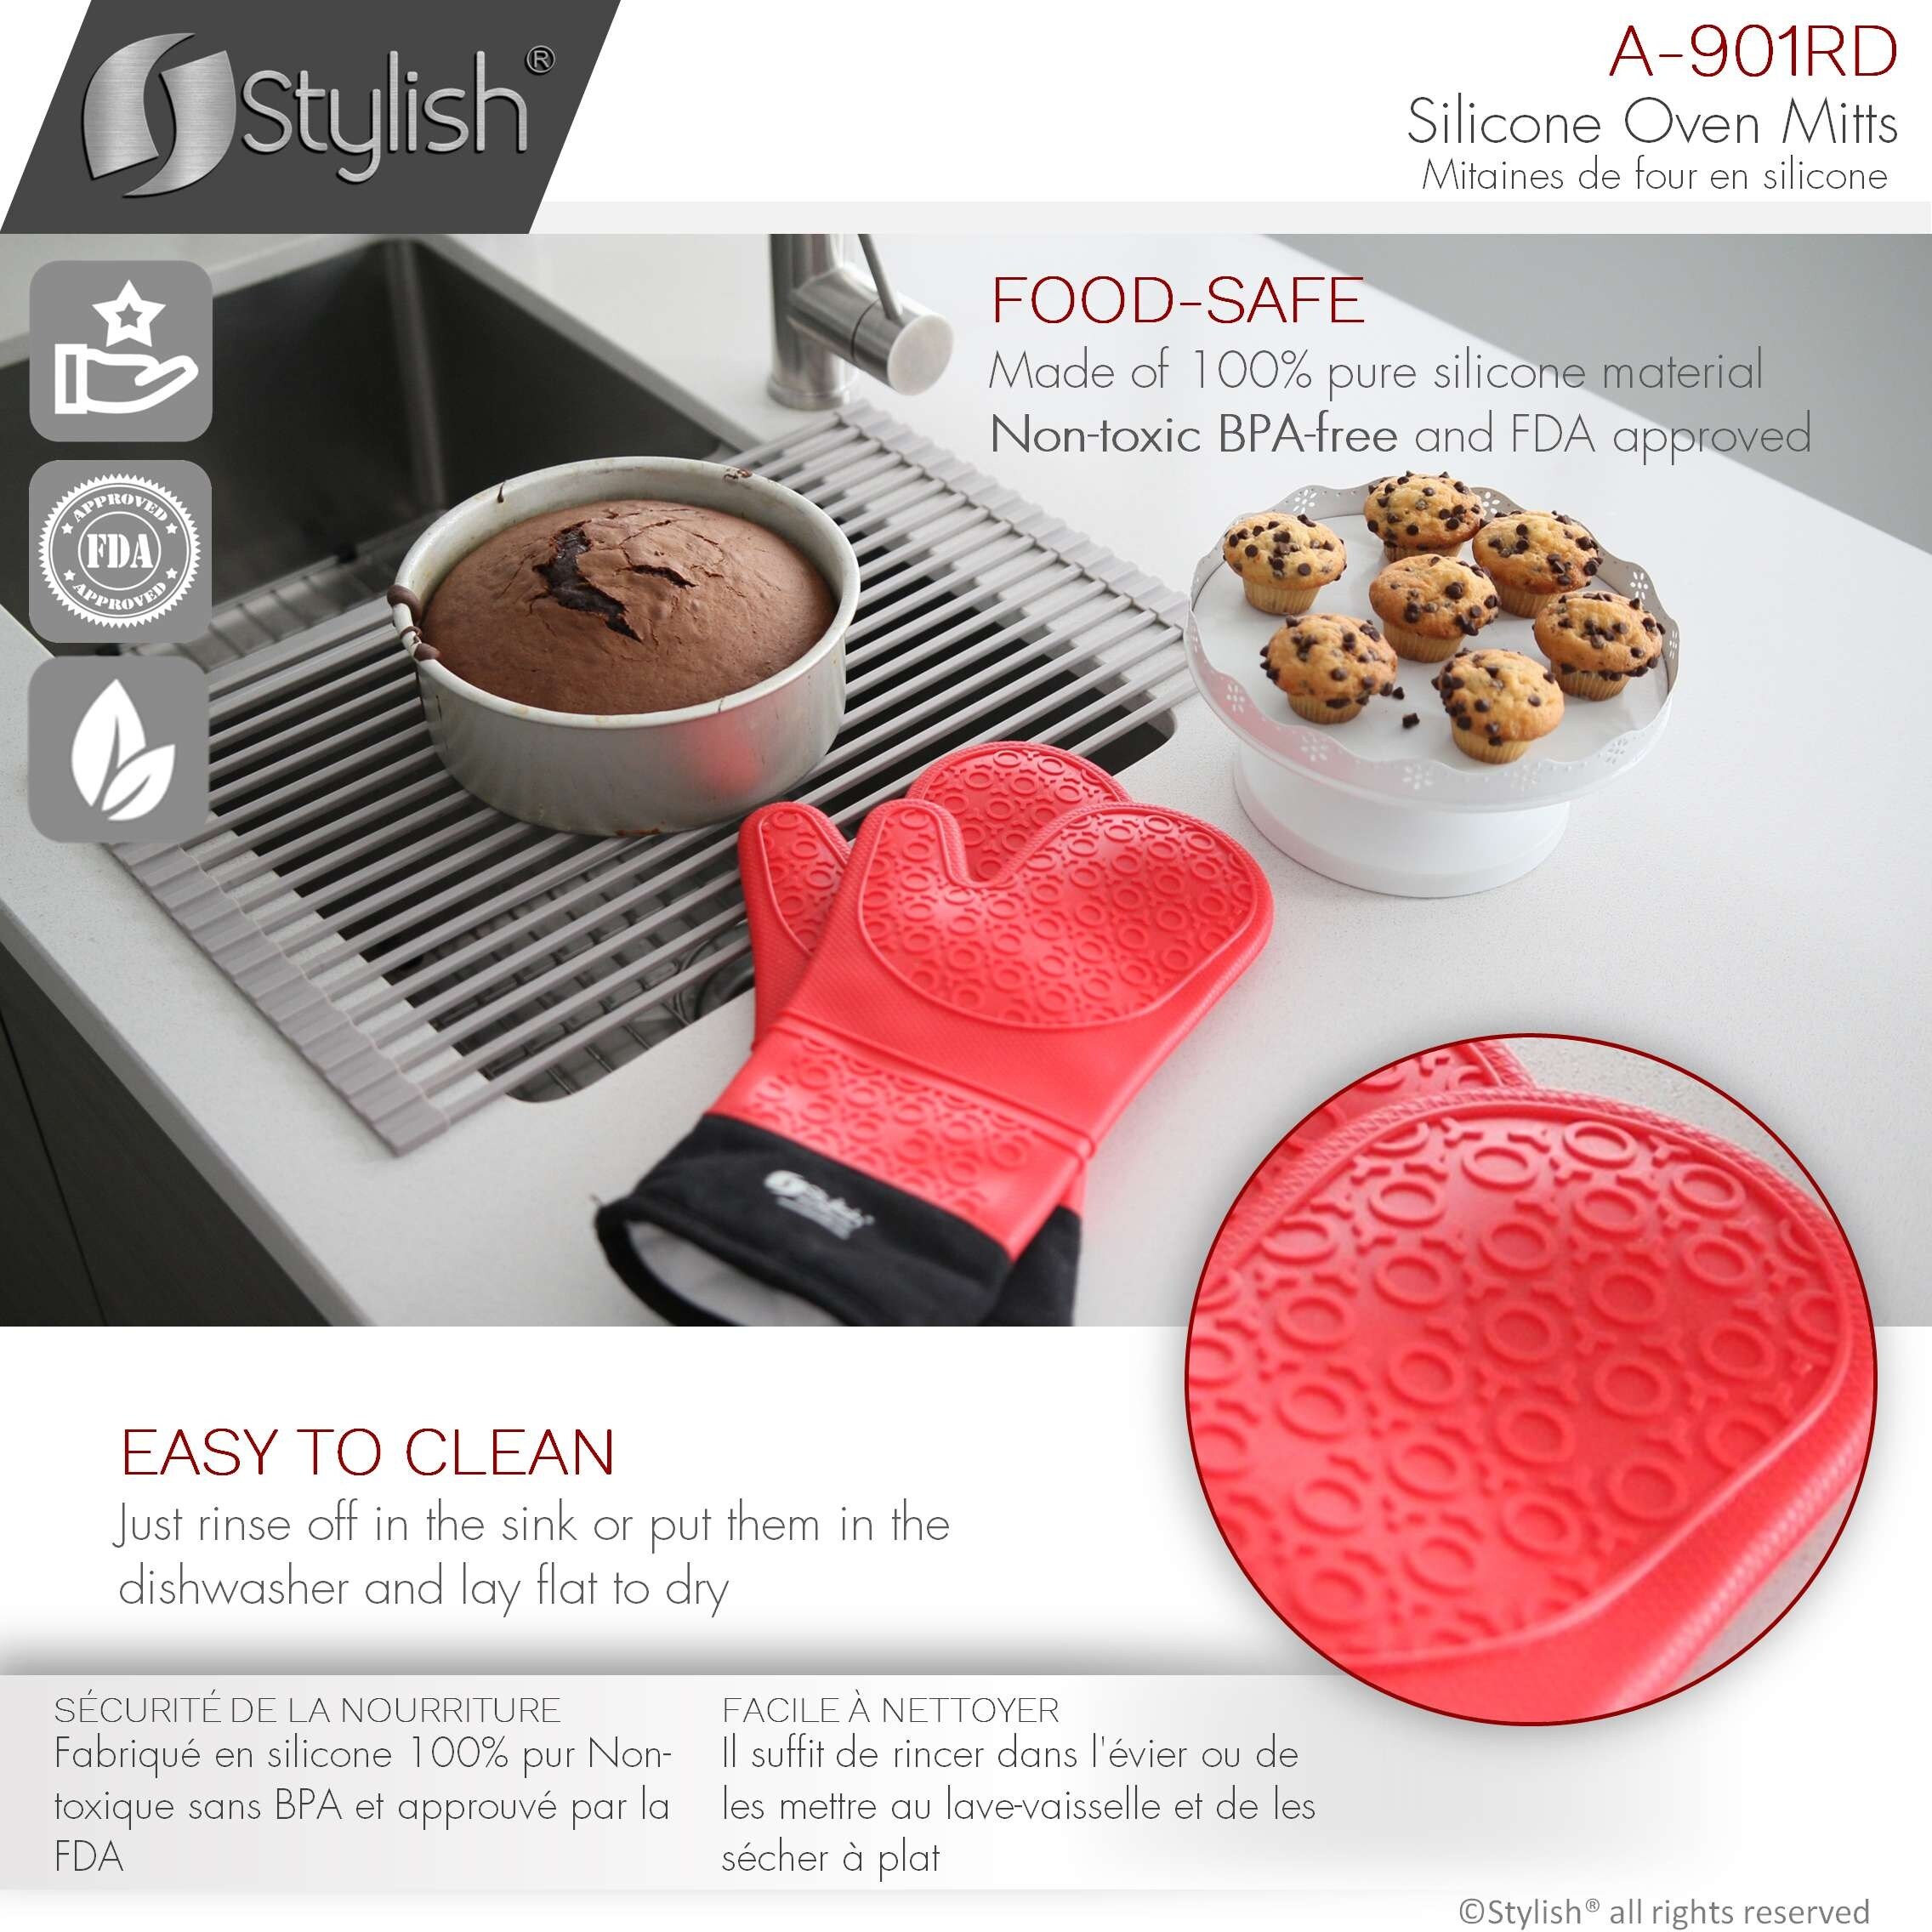 Kitchen Silicone Heat Resistant Hand Protection Protectors Oven Mitt Pad  Pair - Bed Bath & Beyond - 17599522